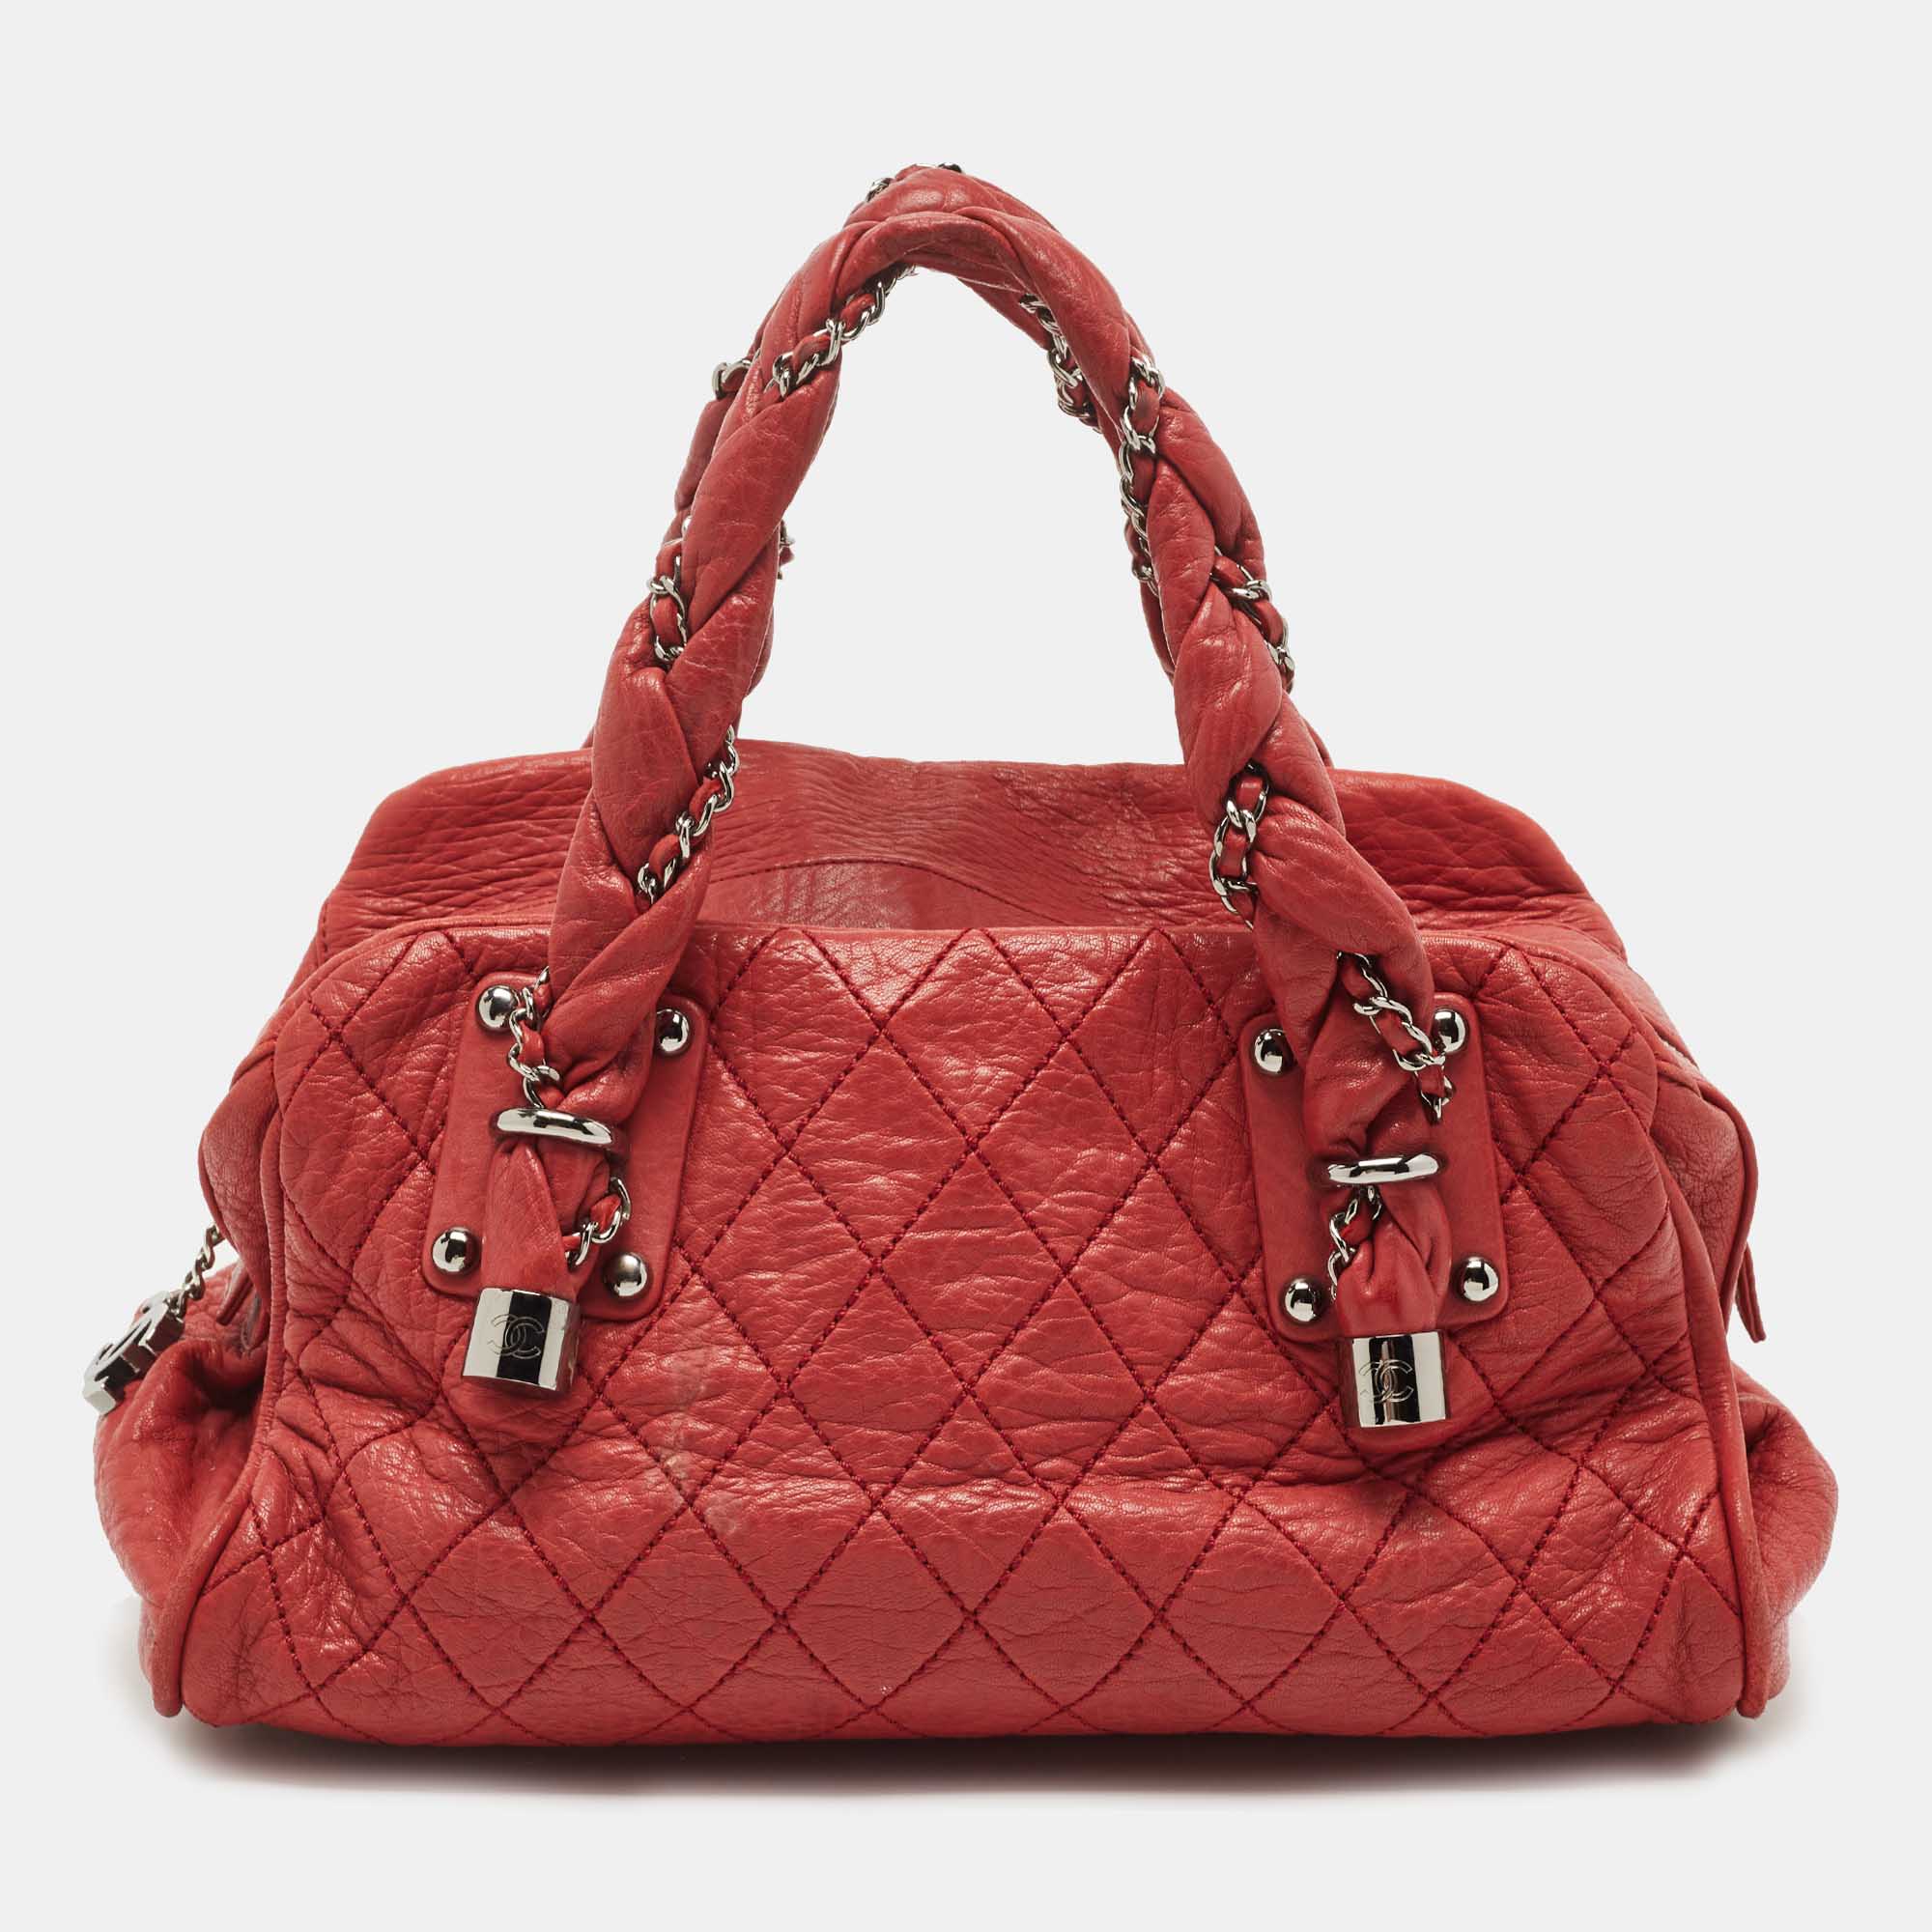 Chanel Red Quilted Leather Lady Braid Bowler Bag